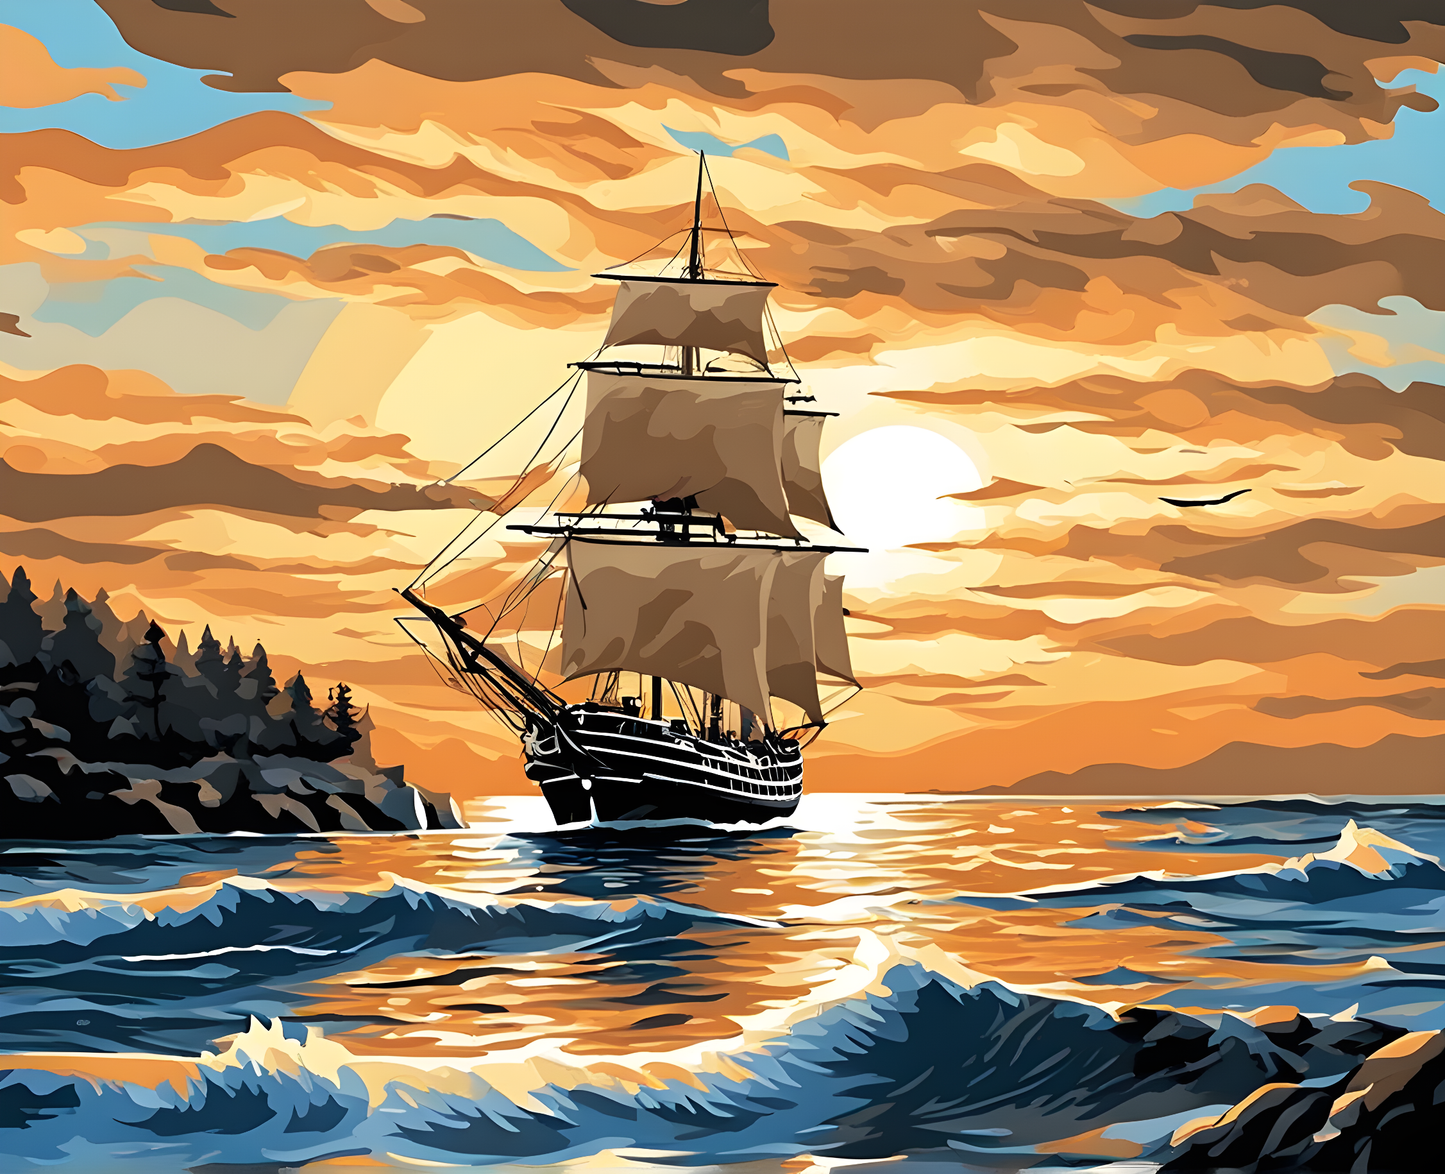 Sailing Ship over Sunrise Background - Van-Go Paint-By-Number Kit